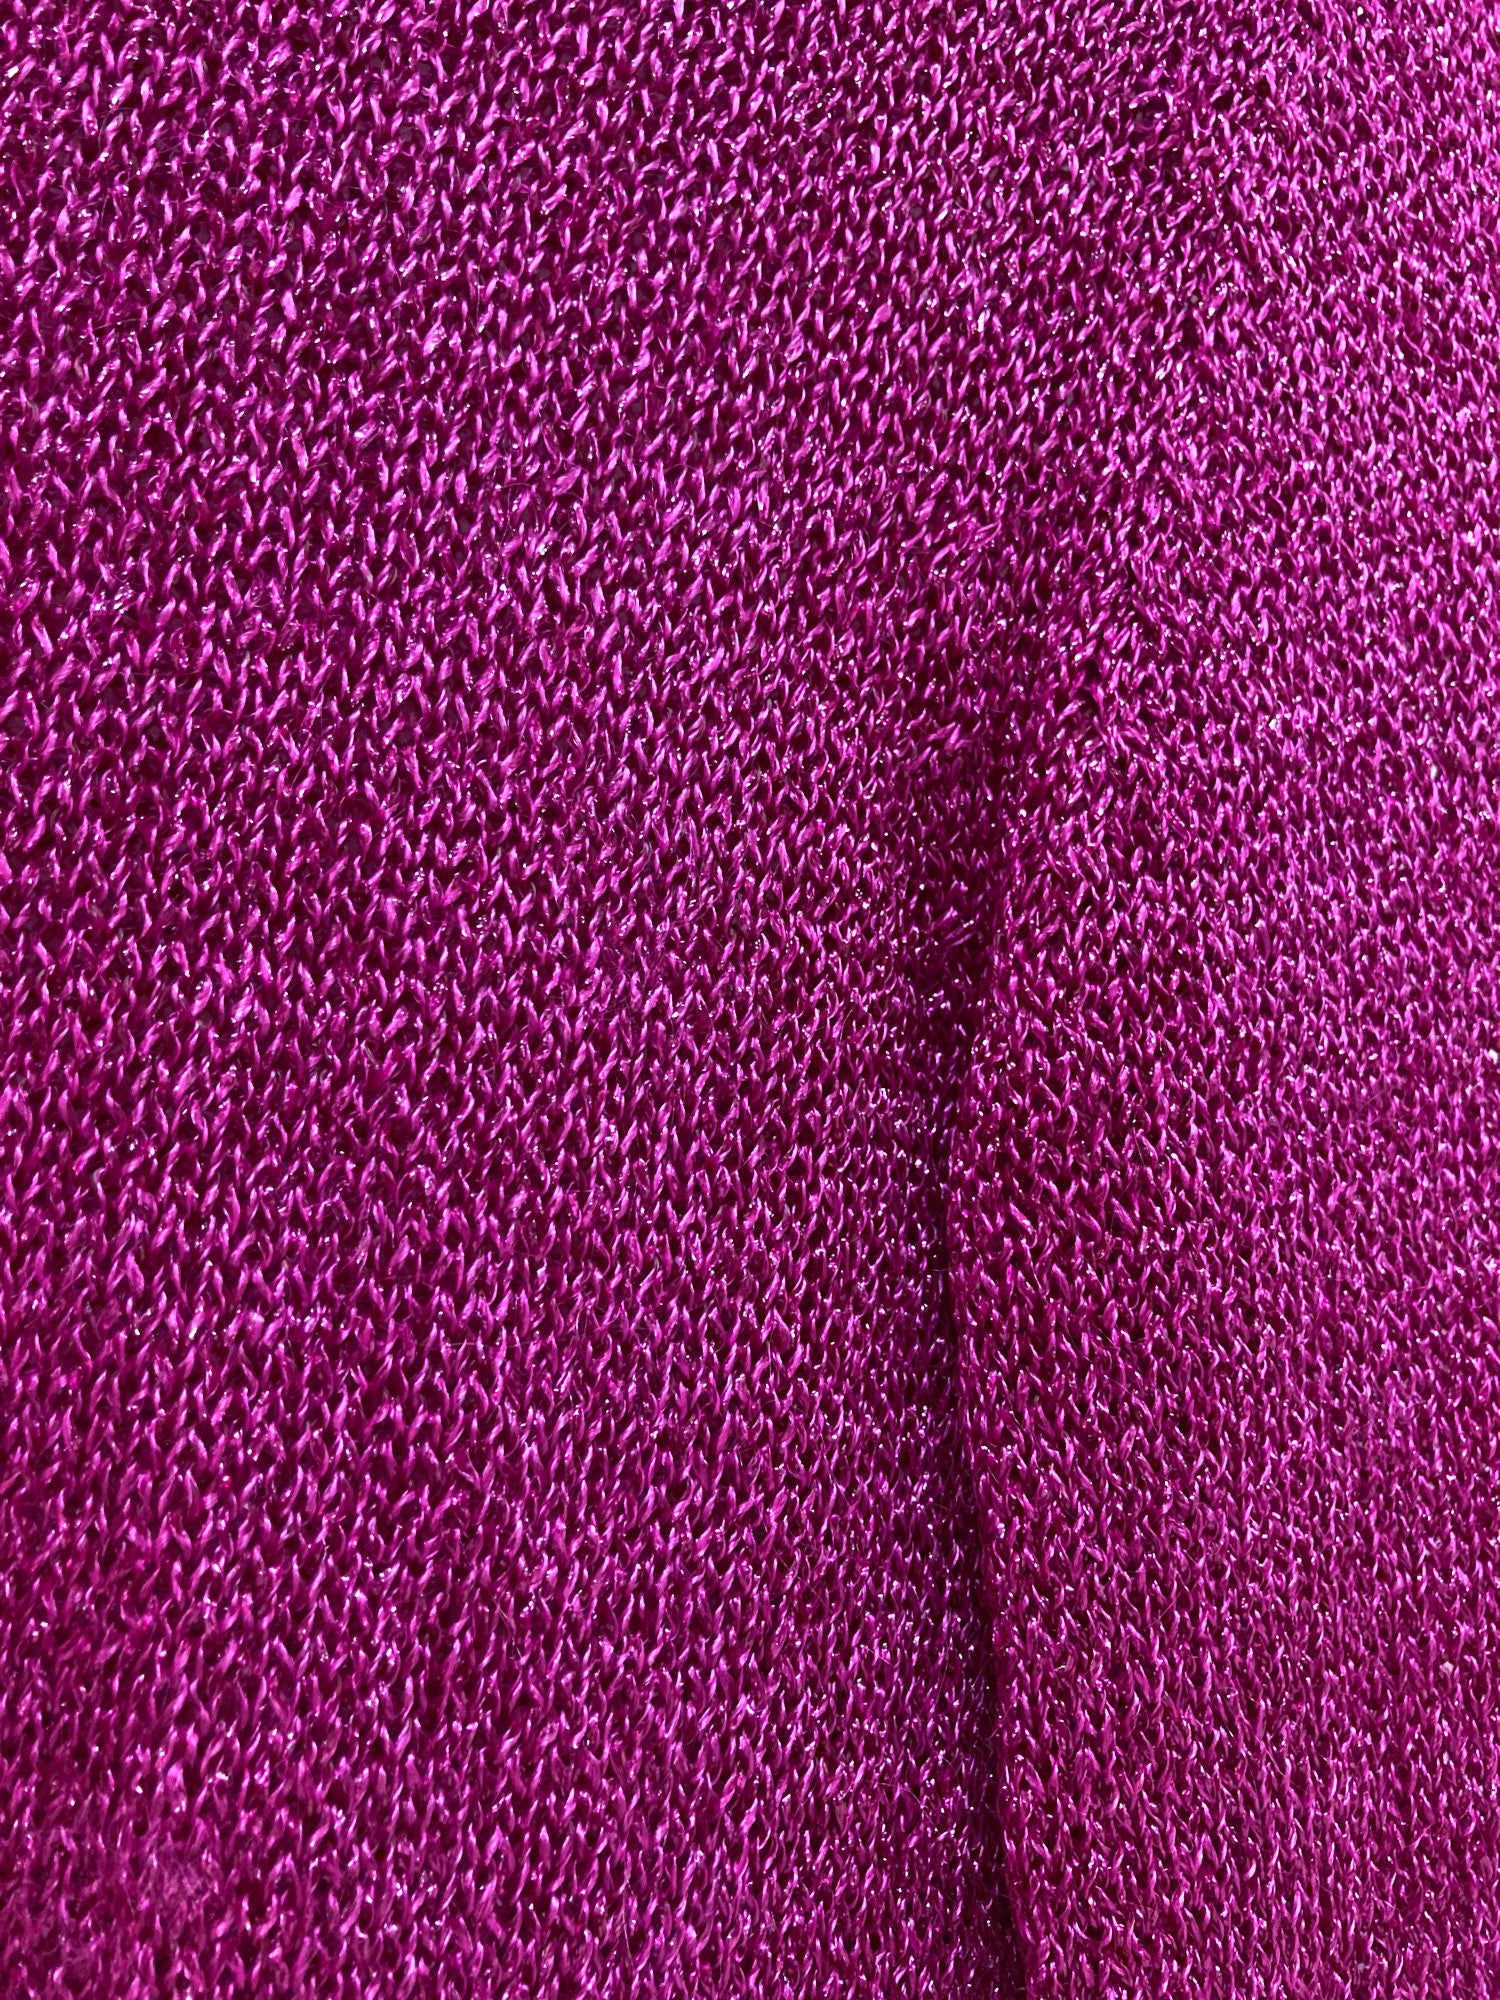 Comme des Garcons 1999 pinky purple nylon sweater with glittery finish